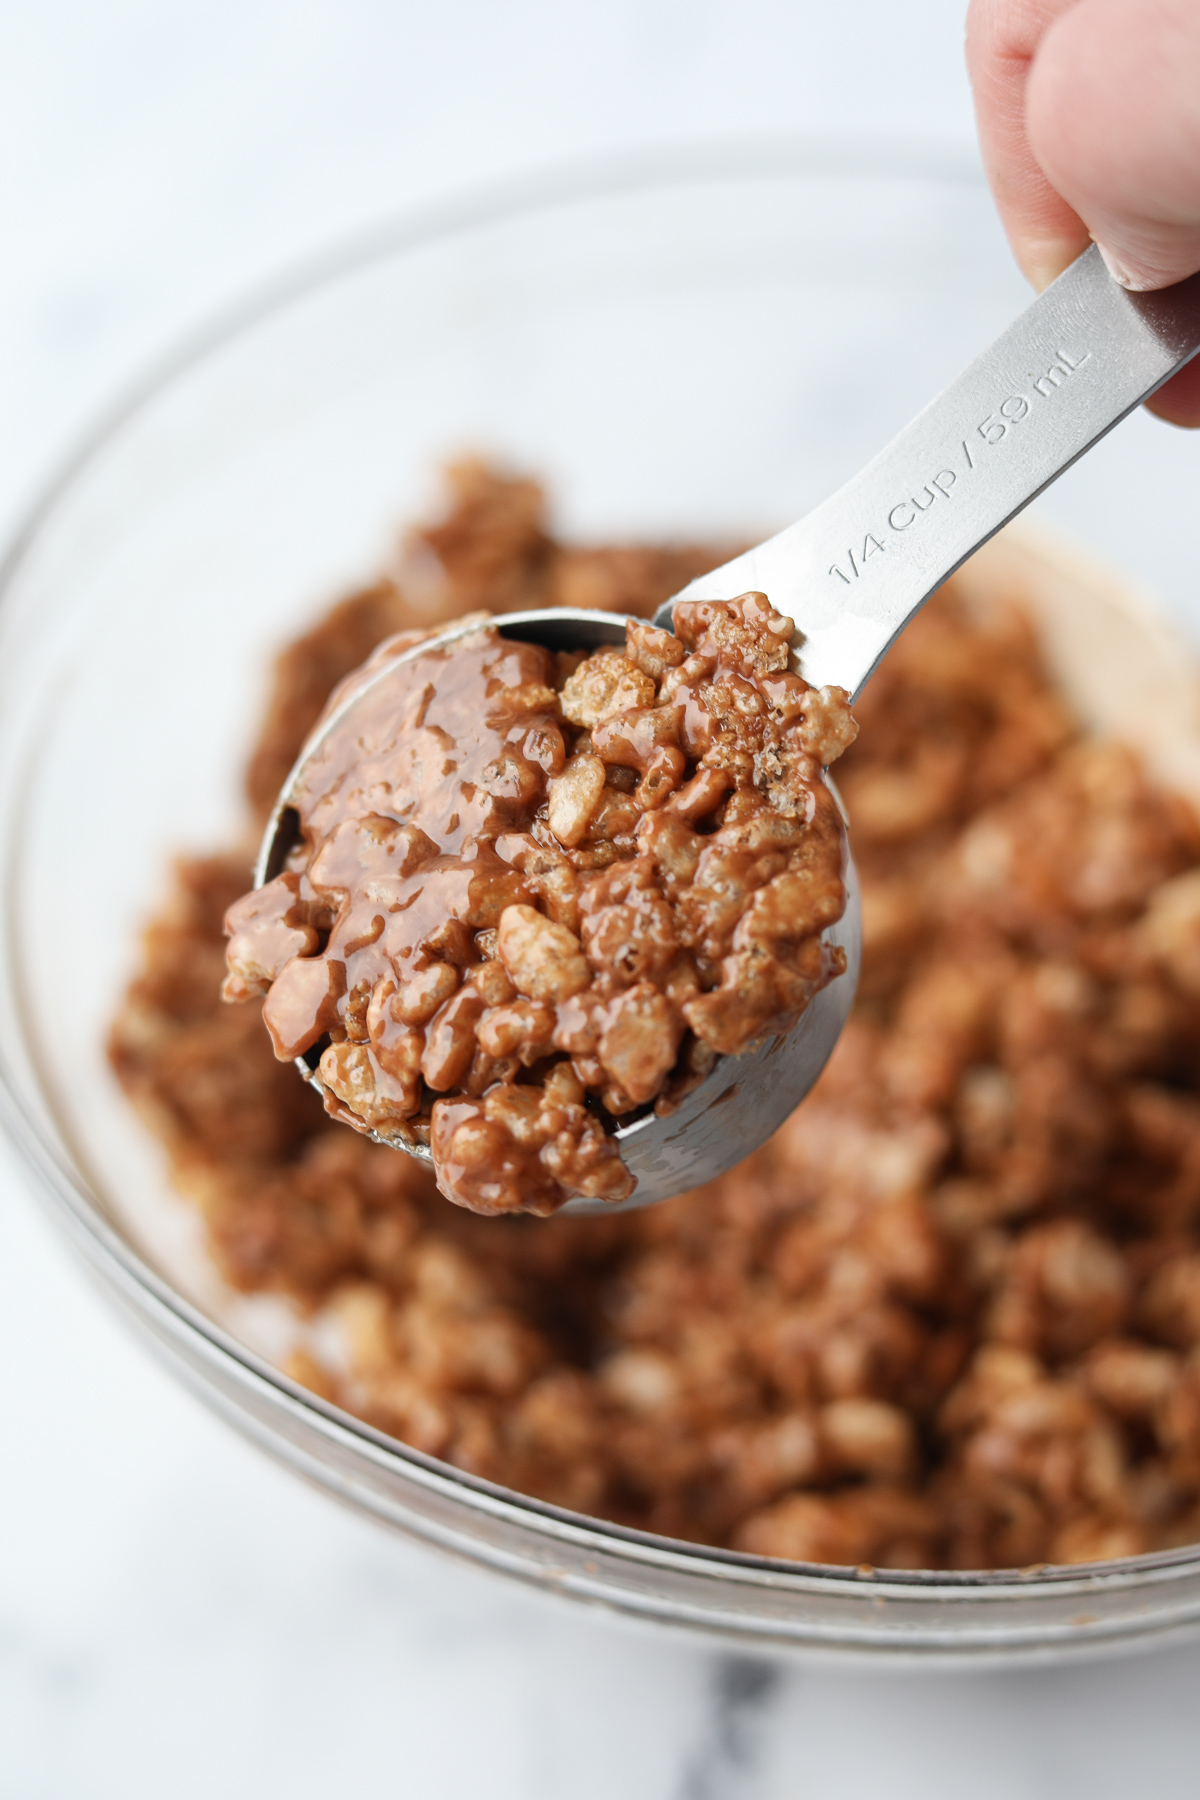 Scooping chocolate coated Rice Krispies with a measuring cup.